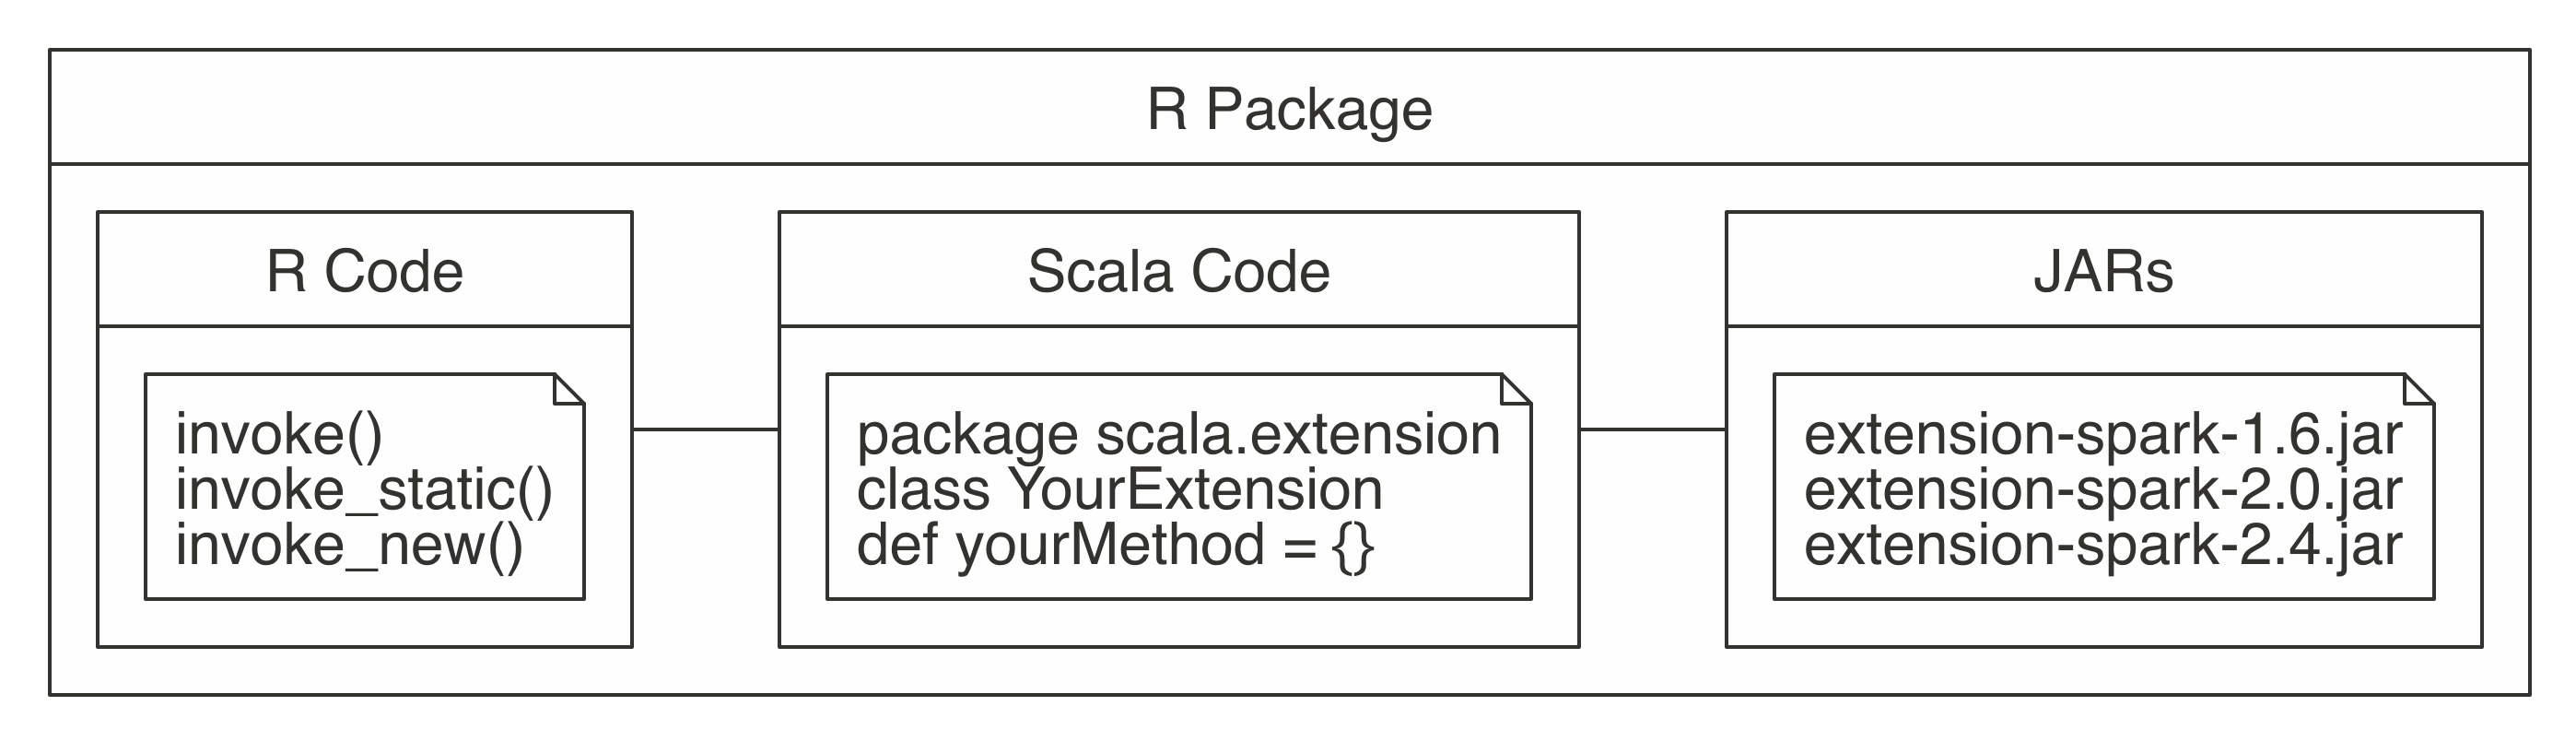 R package structure when using Scala code